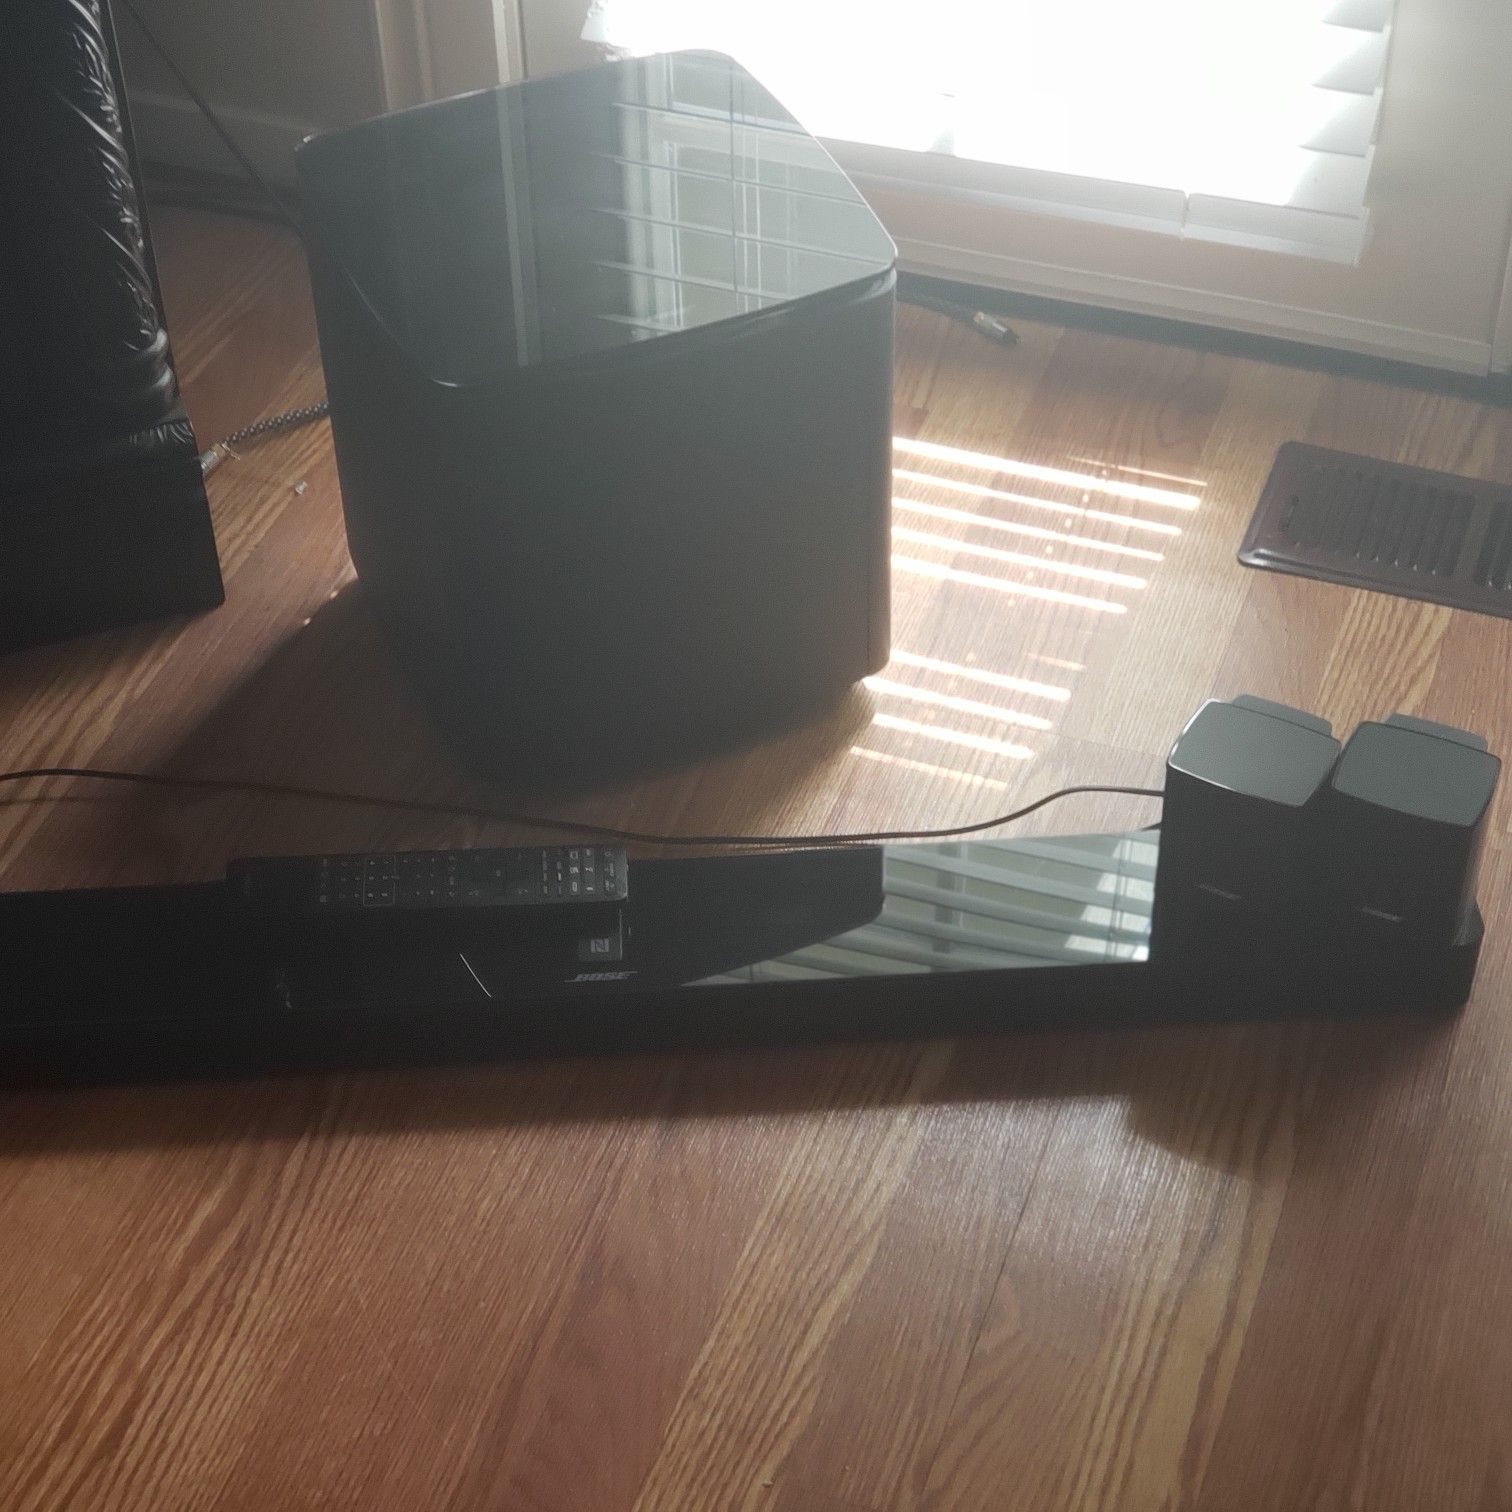 BOSE 300 ACOUSTIC HOME THEATER SYSTEM